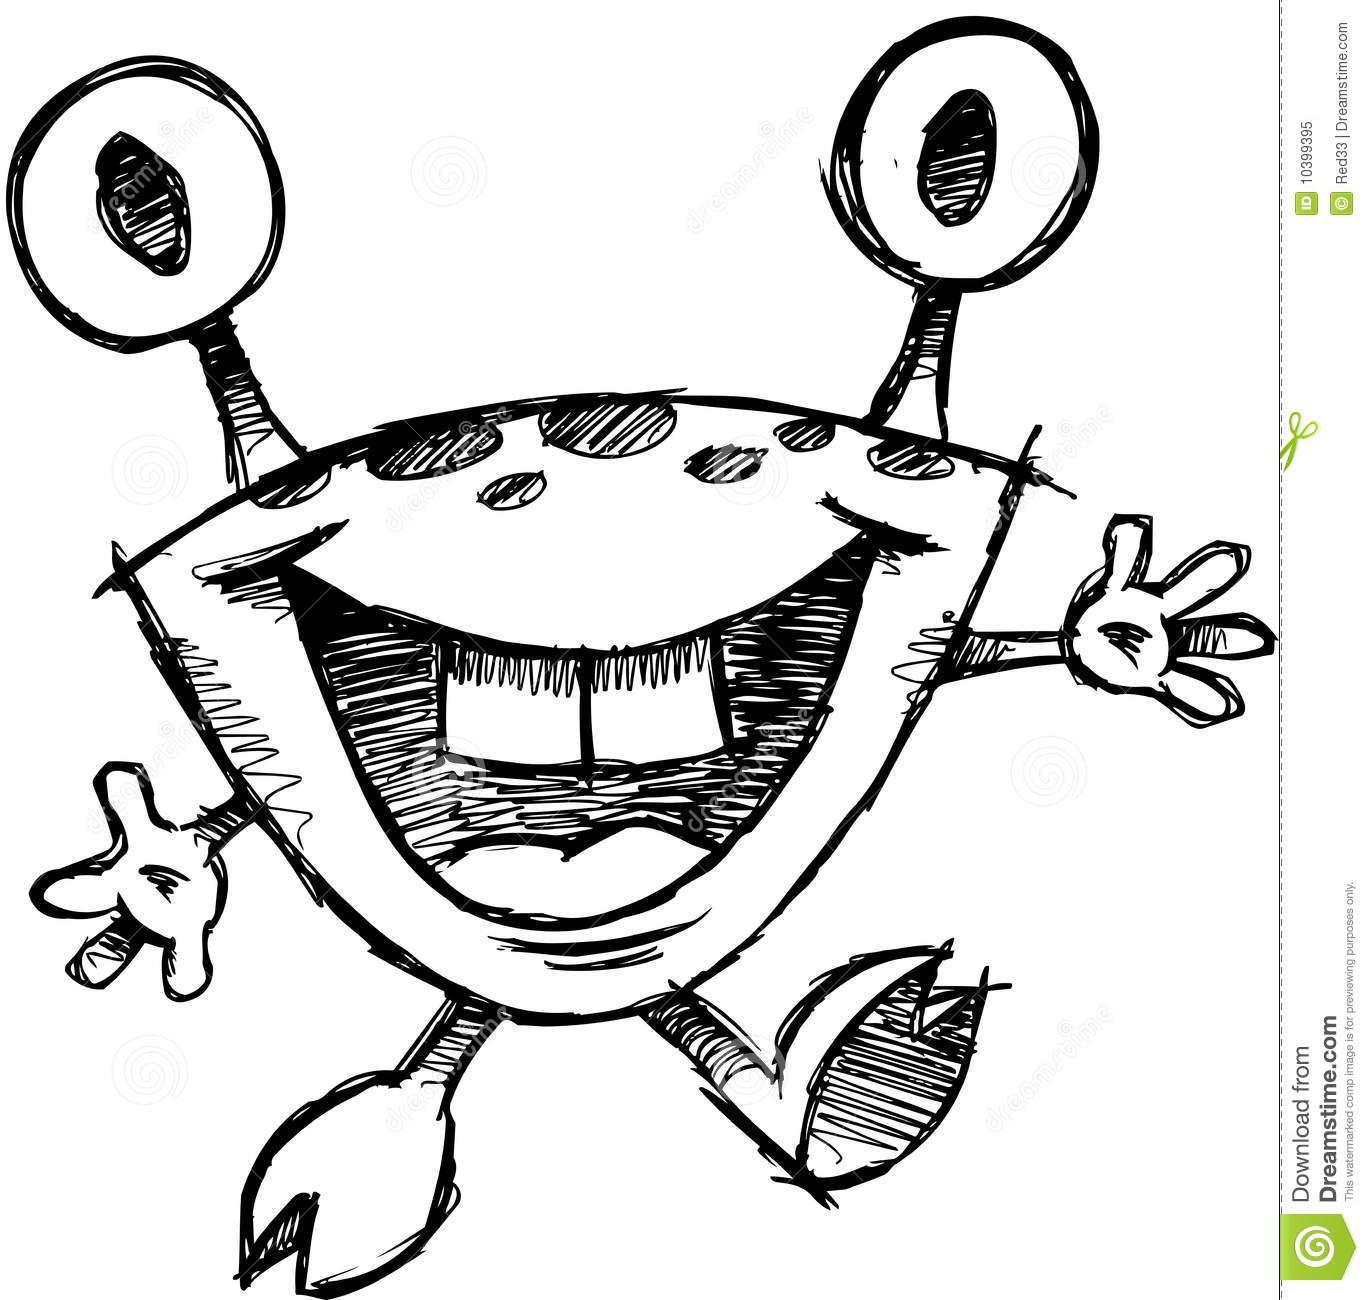 Sketchy Monster Vector Illustration Royalty Free Stock Photo   Image